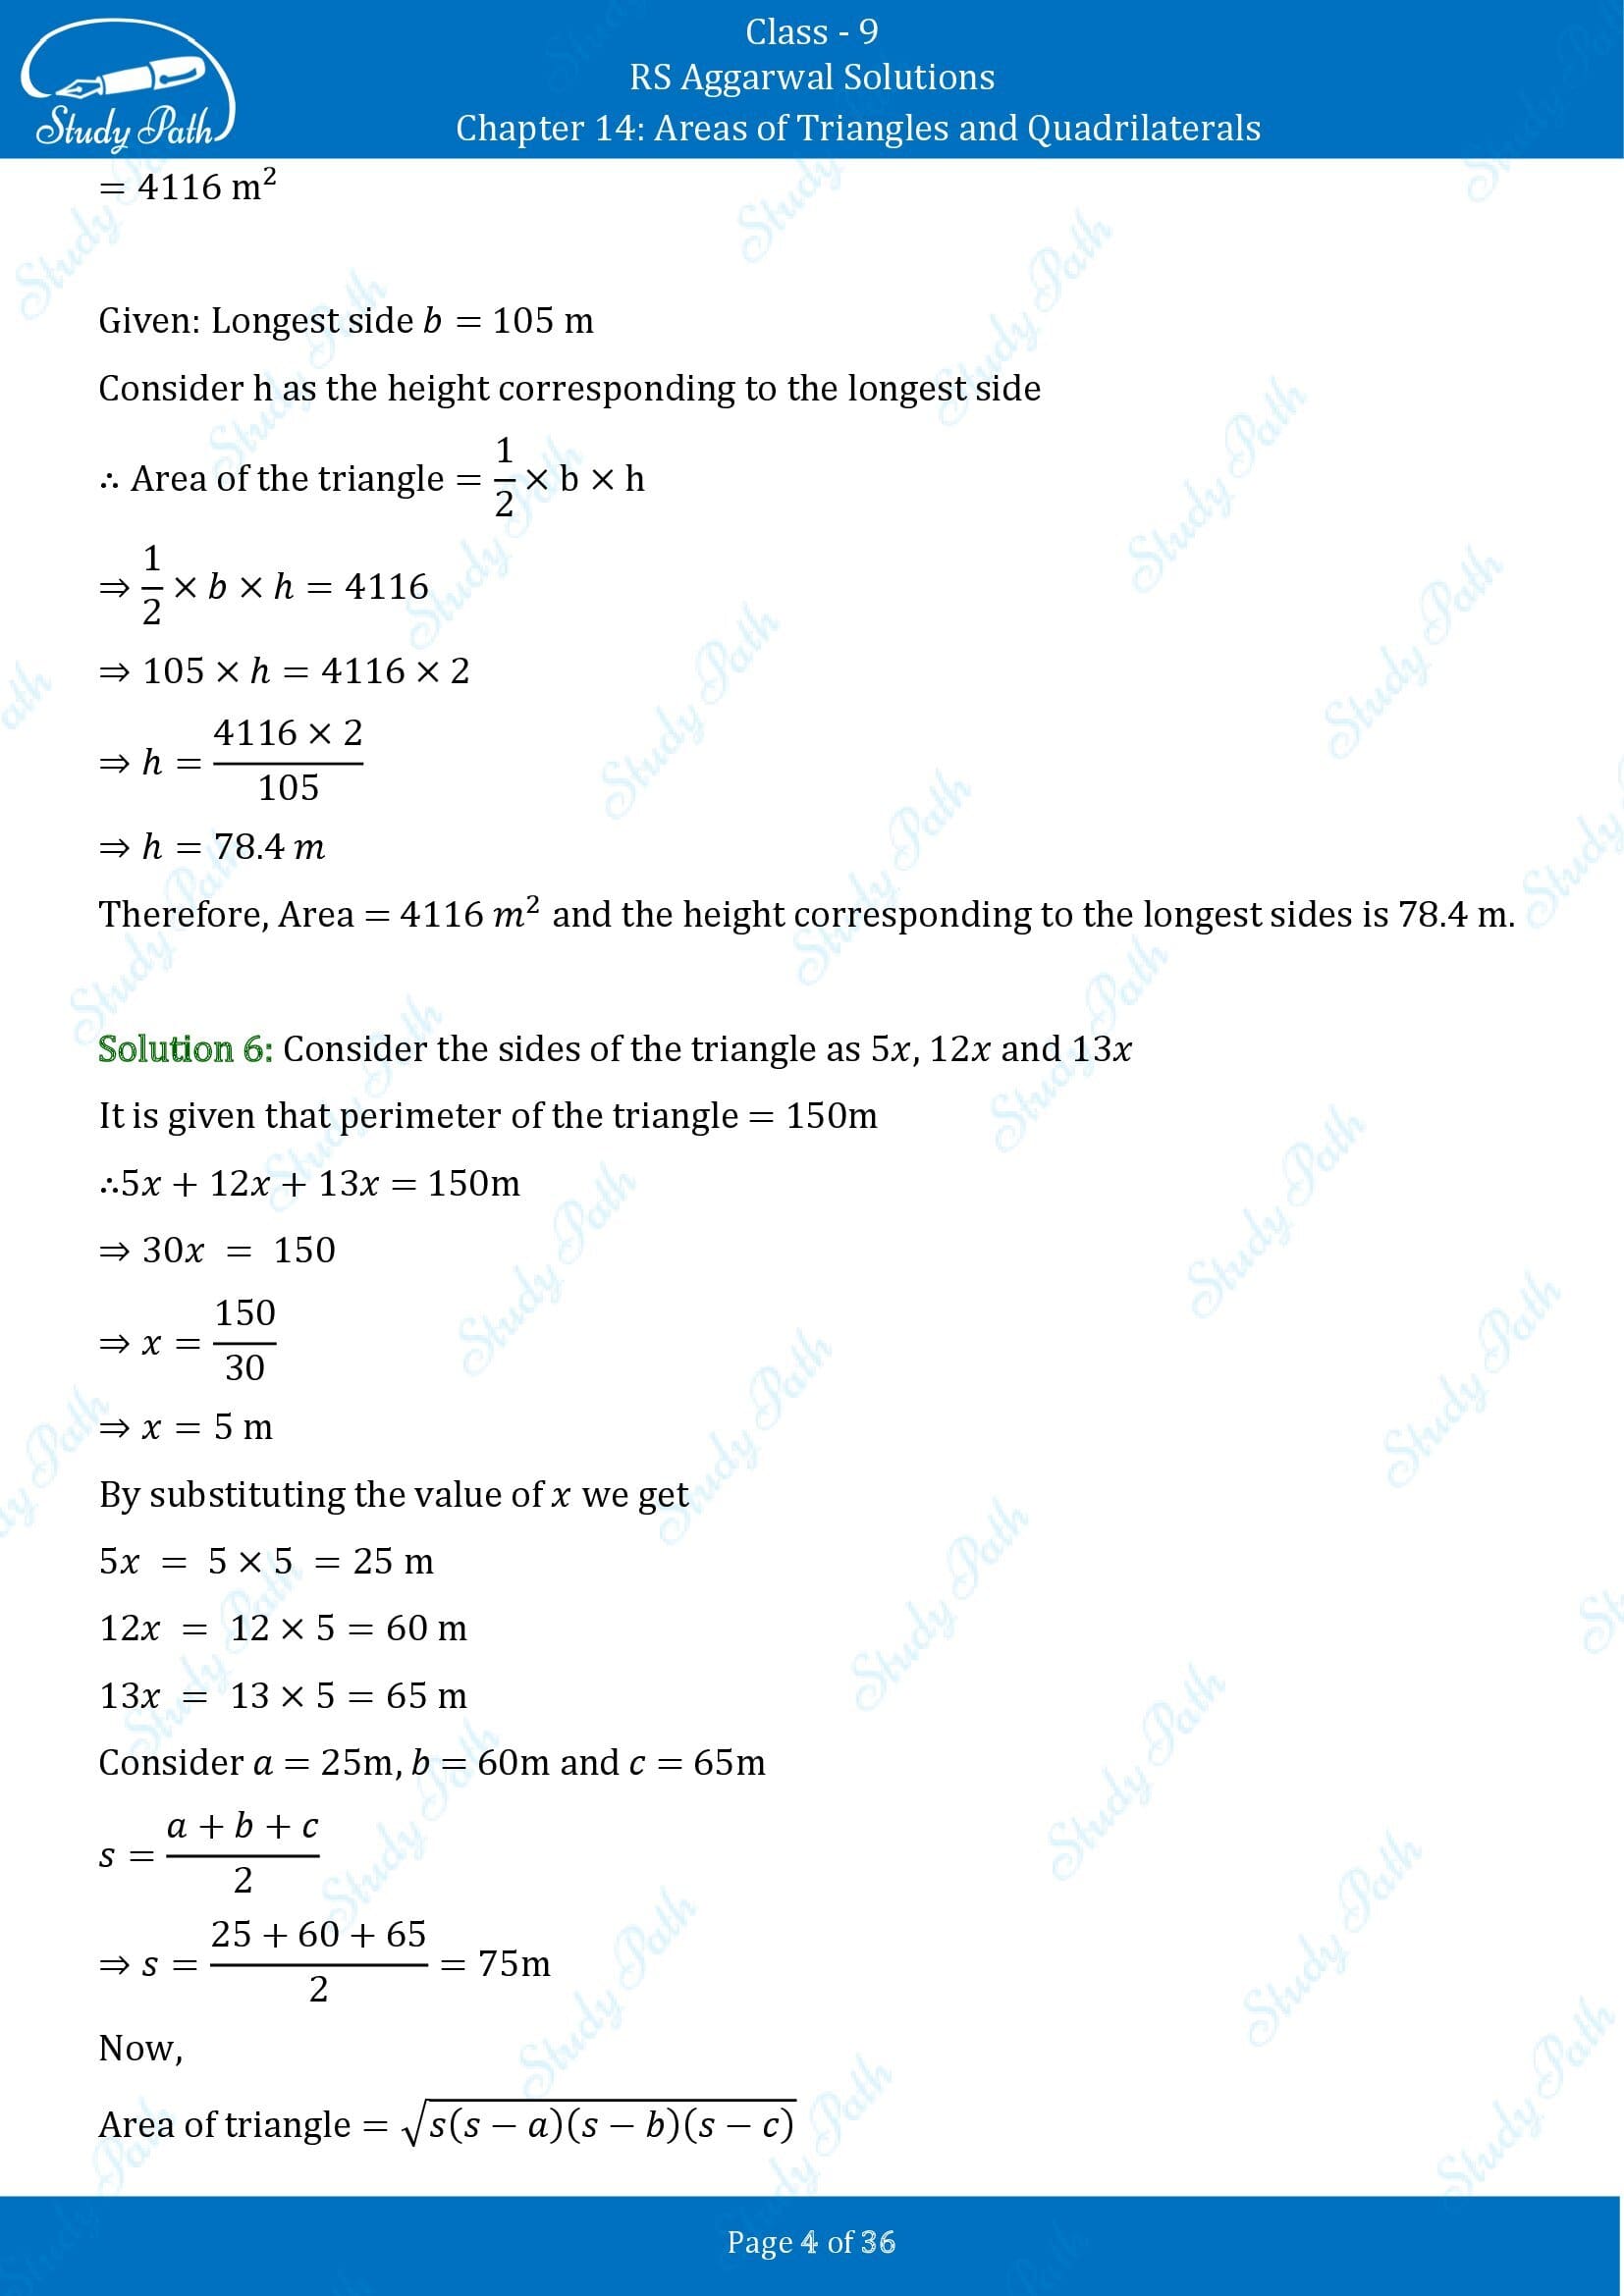 RS Aggarwal Solutions Class 9 Chapter 14 Areas of Triangles and Quadrilaterals Exercise 14 00004